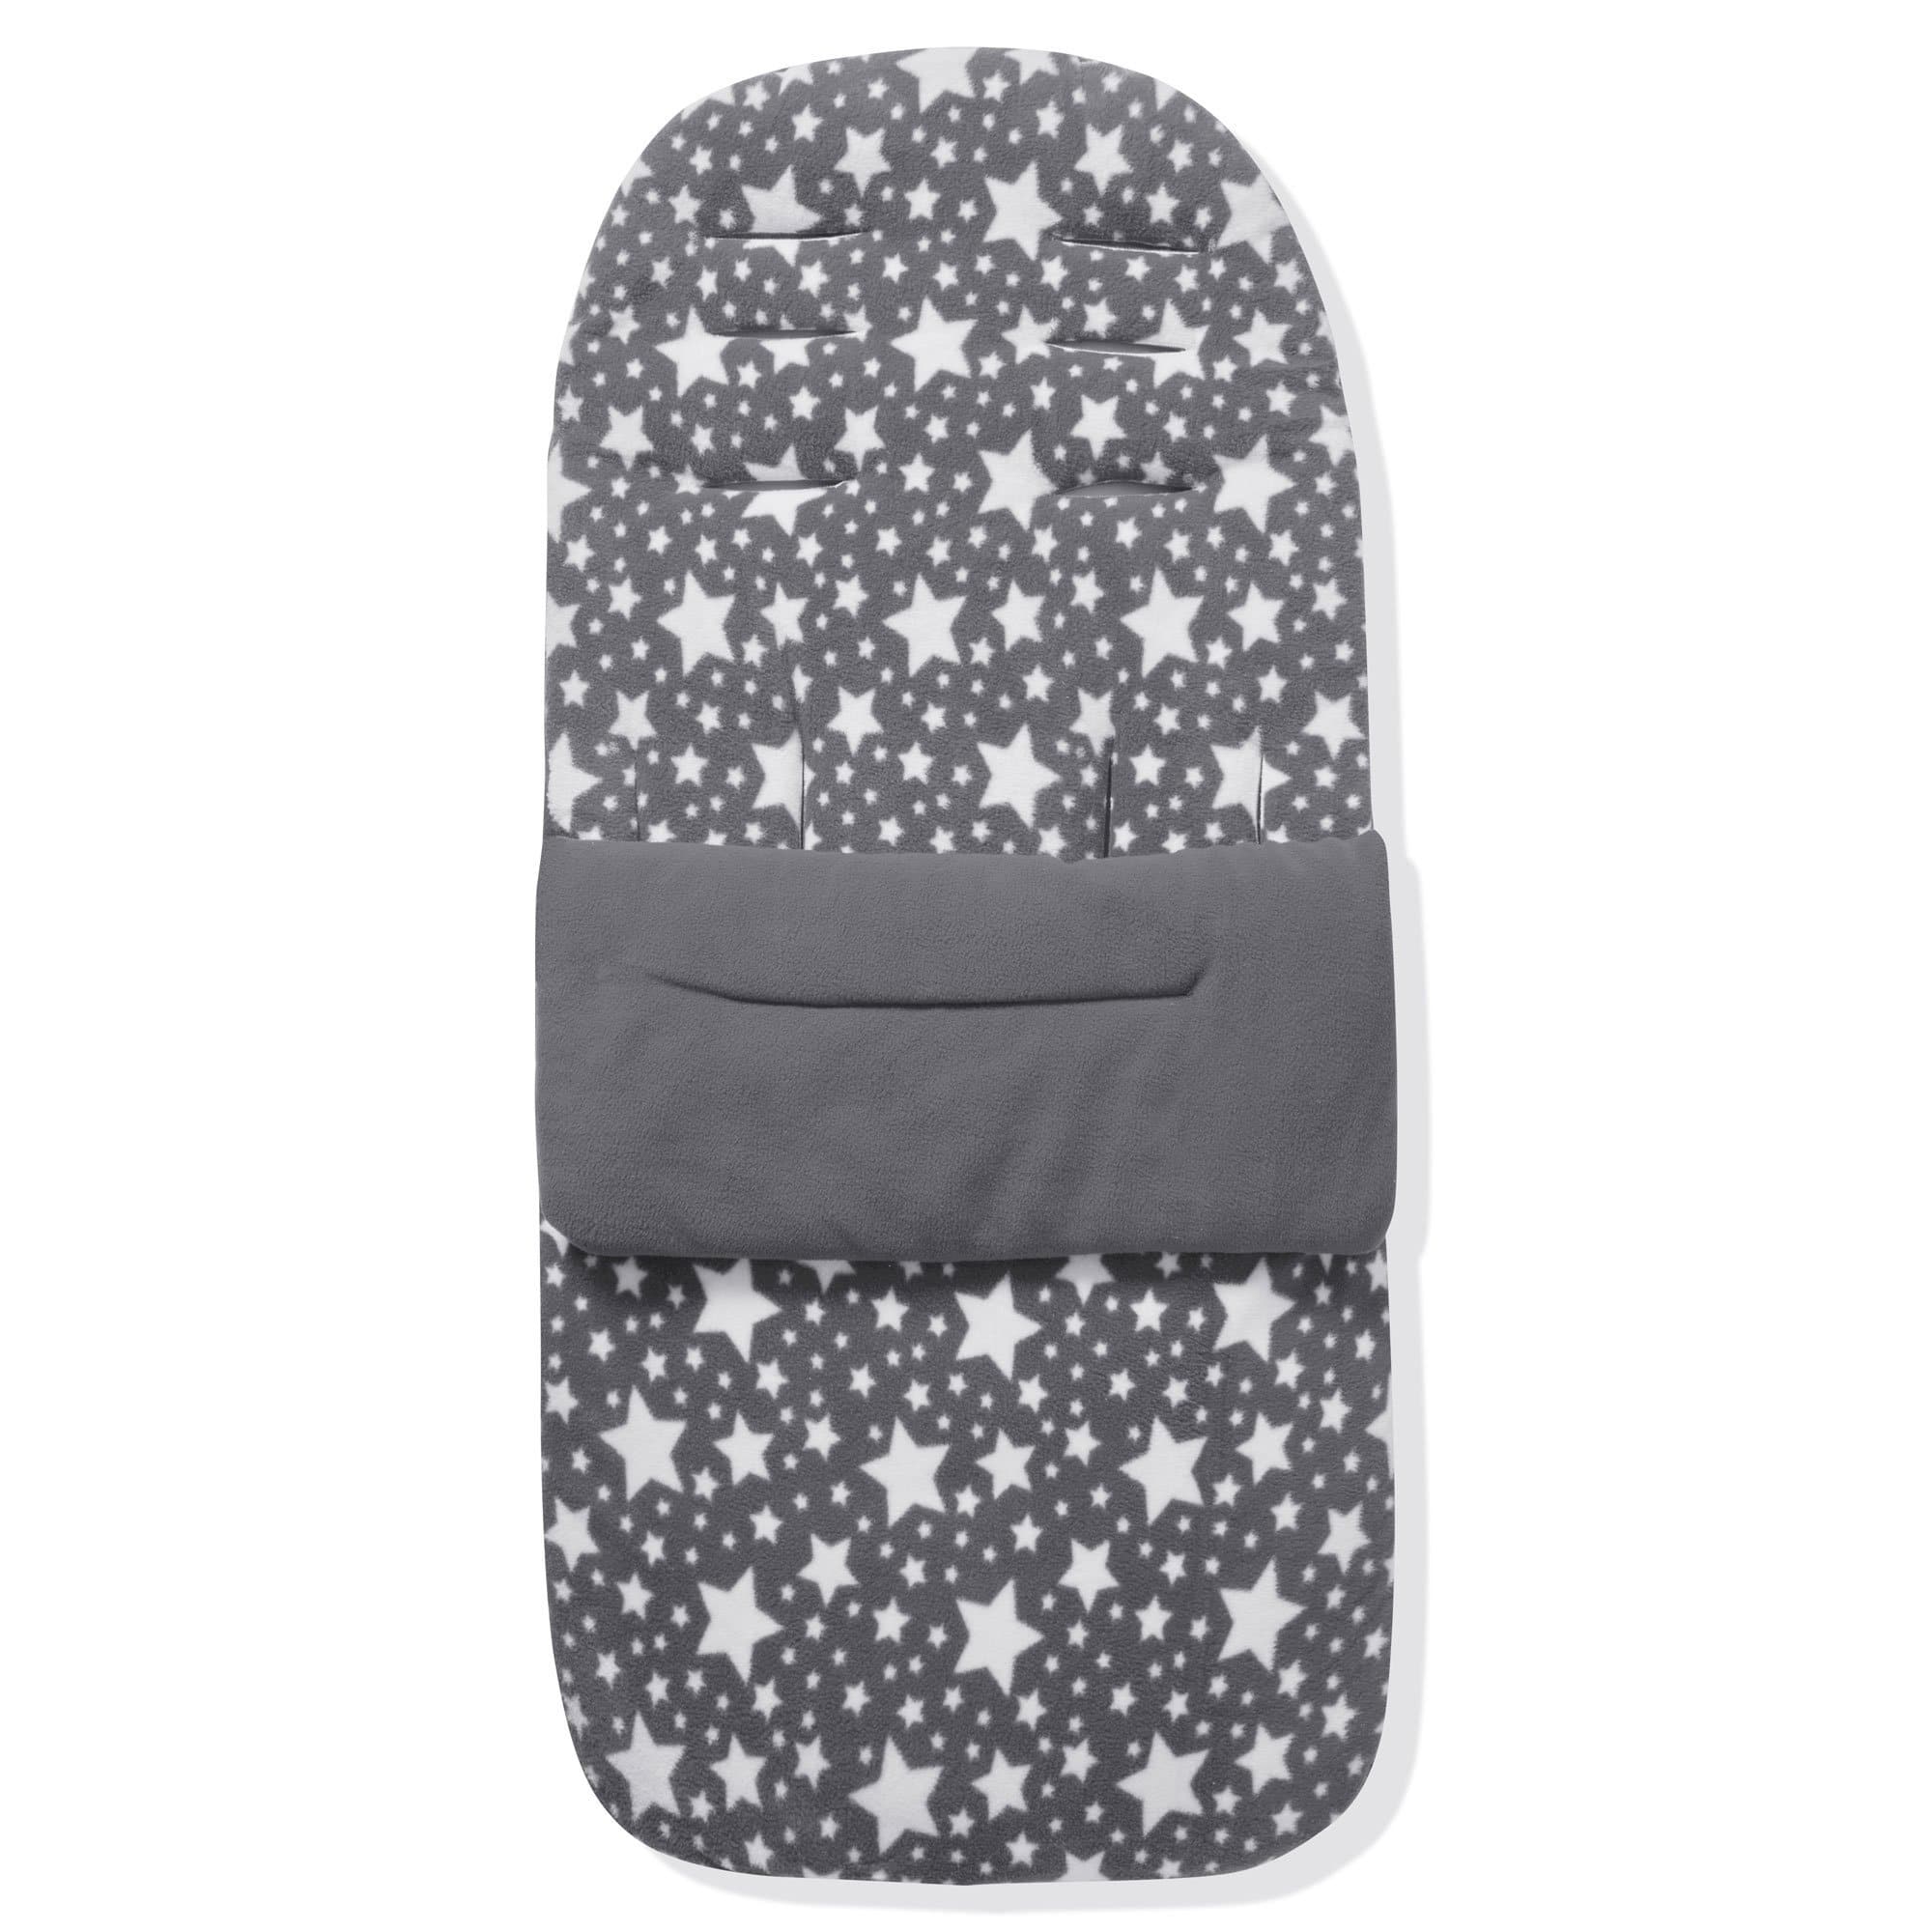 Fleece Footmuff / Cosy Toes Compatible with Mee-Go - Grey Star / Fits All Models | For Your Little One